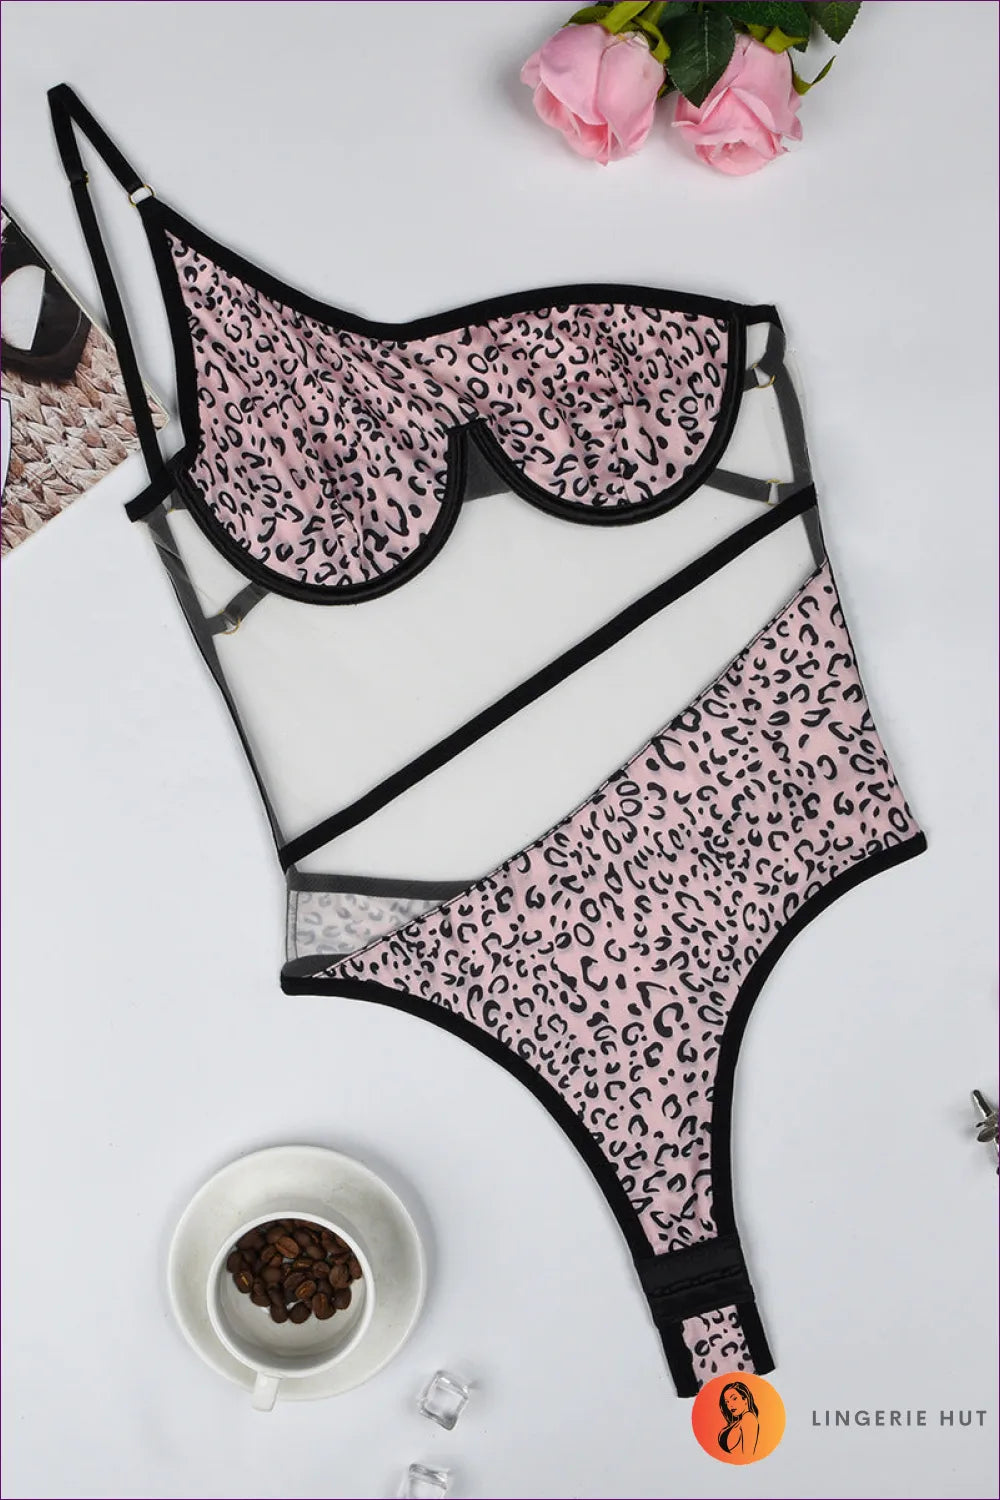 Designed For The Daring And Fashion-forward, This Bodysuit Is Ideal Those Who Love To Express Their